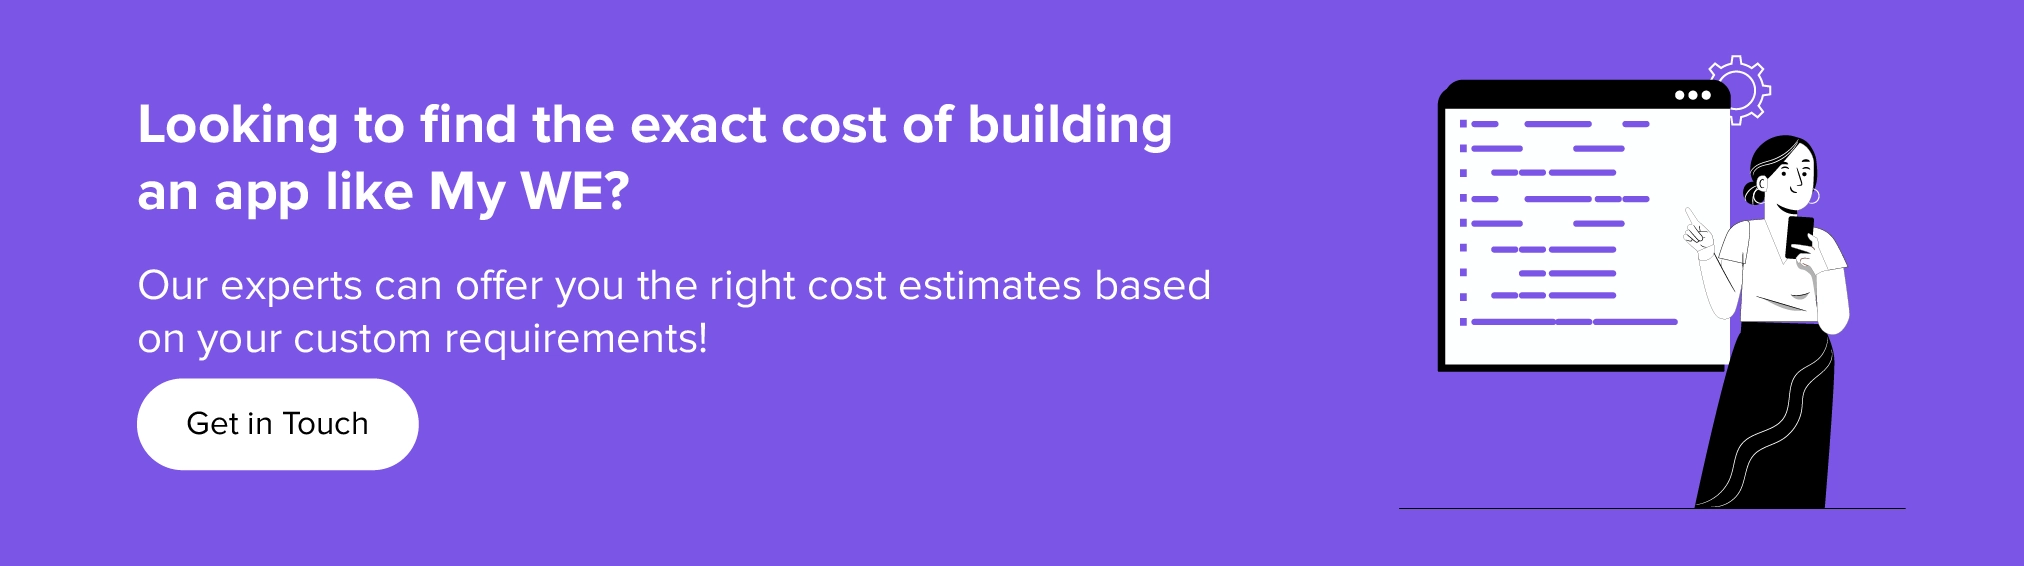 Cost of building an app like My WE